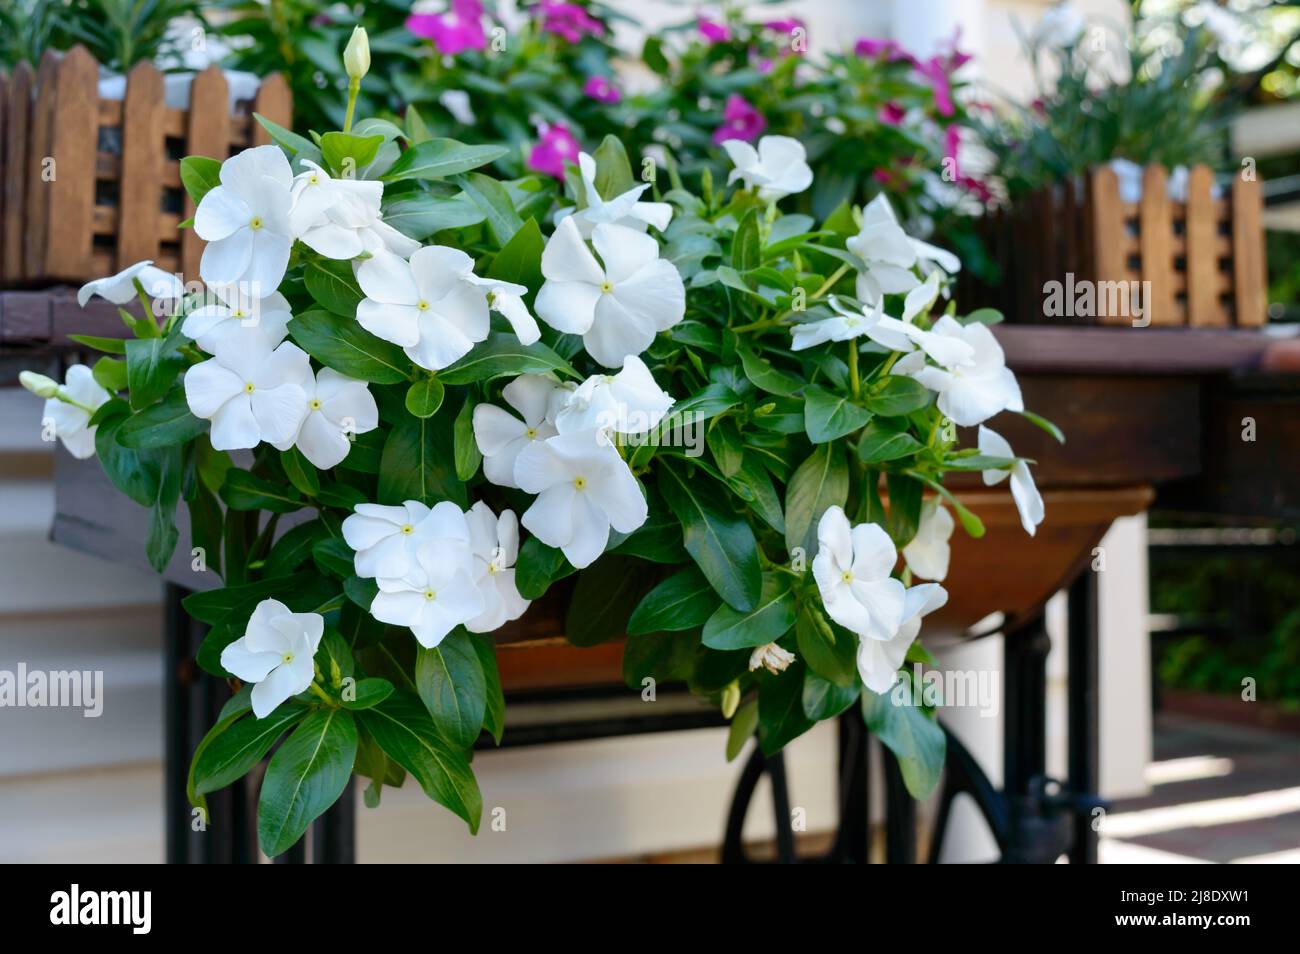 Catharanthus bush with white flowers in wooden boxes near the house. Beautiful annual outdoor flowers. Stock Photo